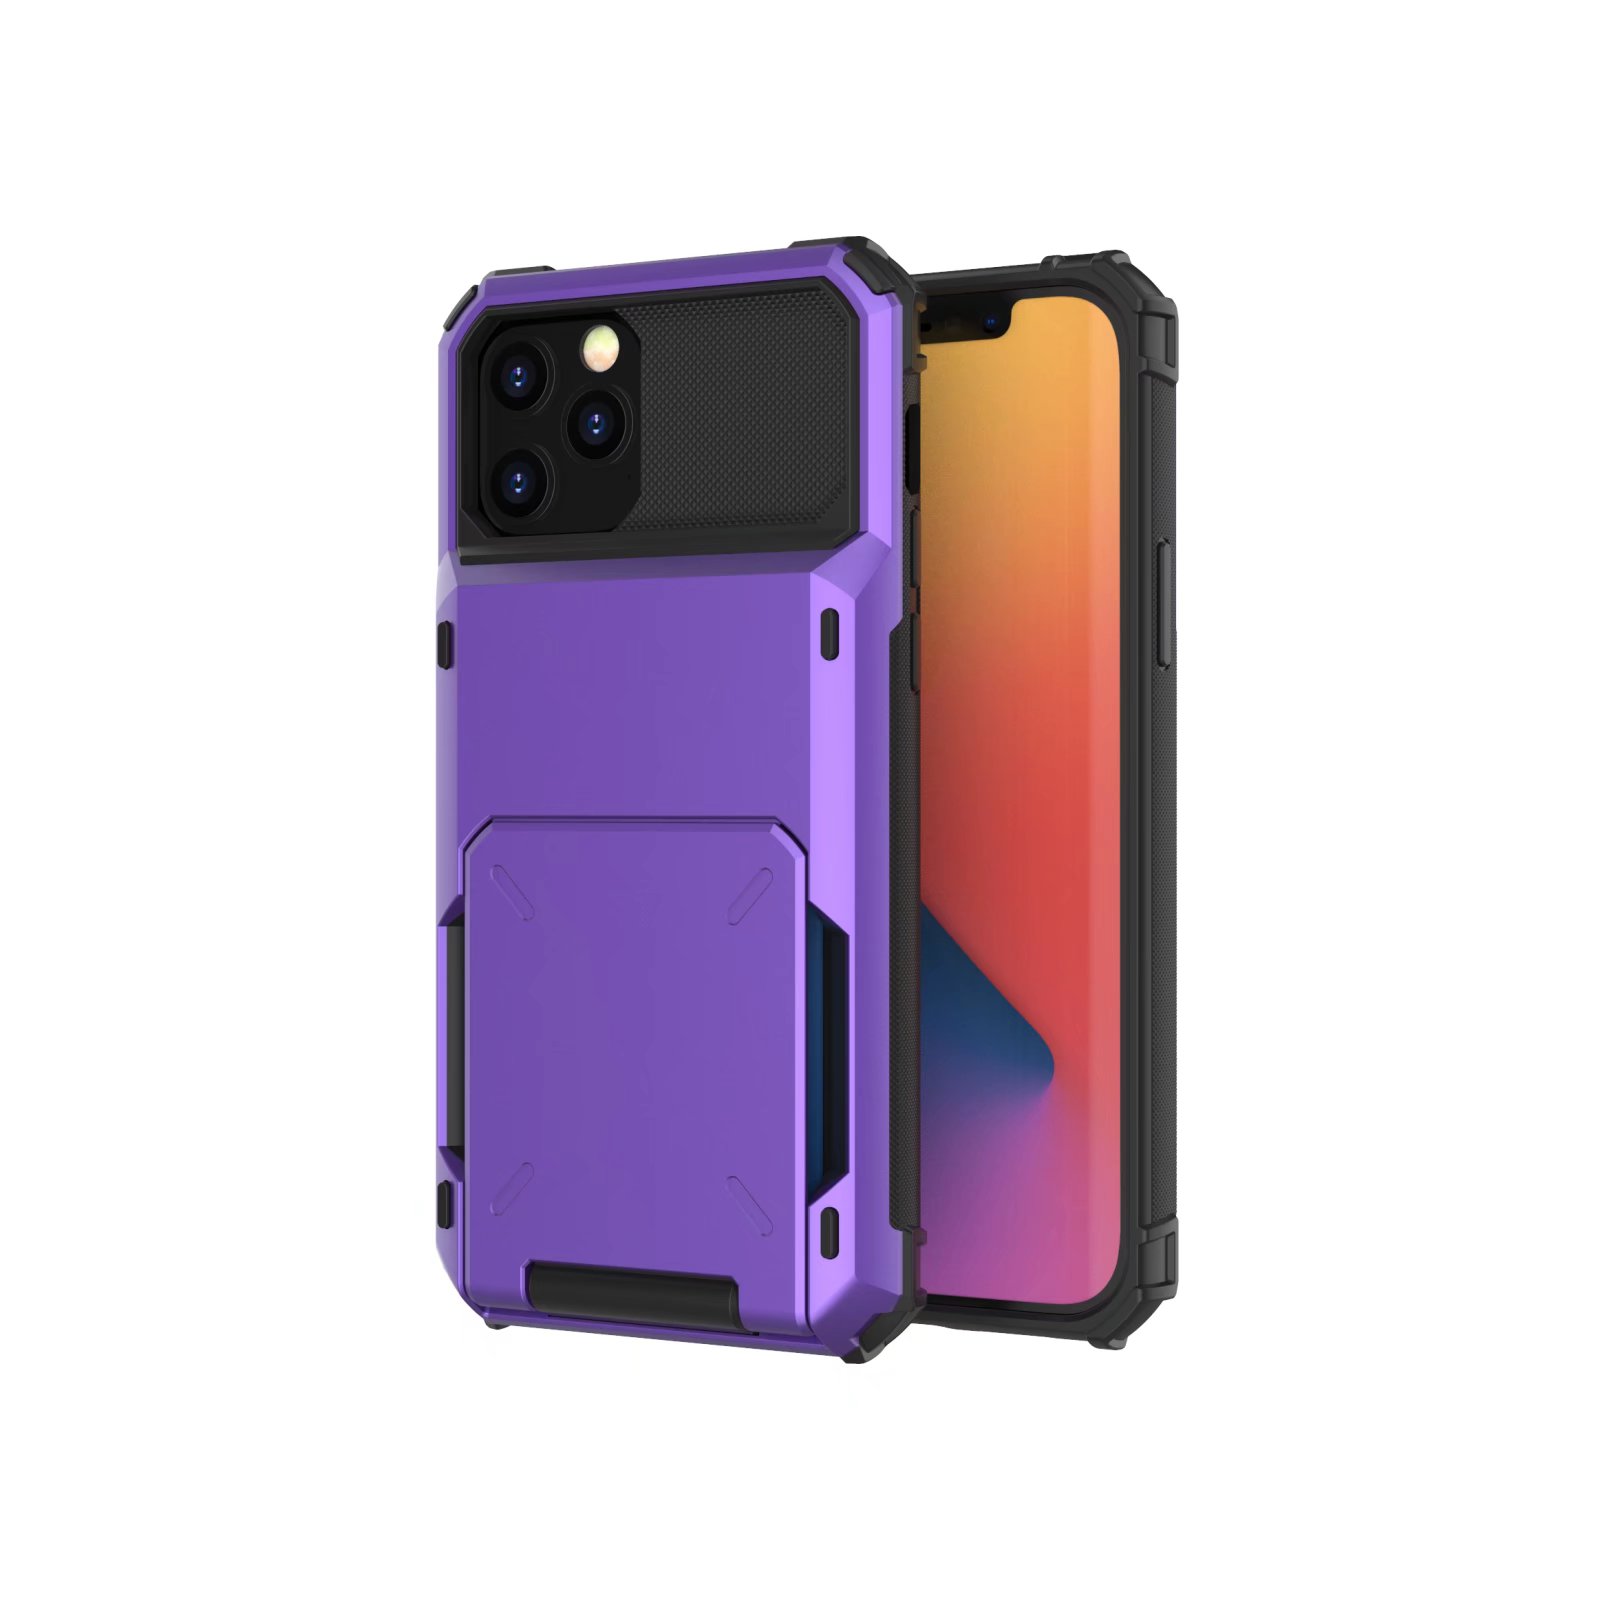 iPhone 12 Pro Max Back Cover Hoesje - Pasjeshouder - Shockproof - TPU - Hardcase - iPhone 12 Pro Max - Paars